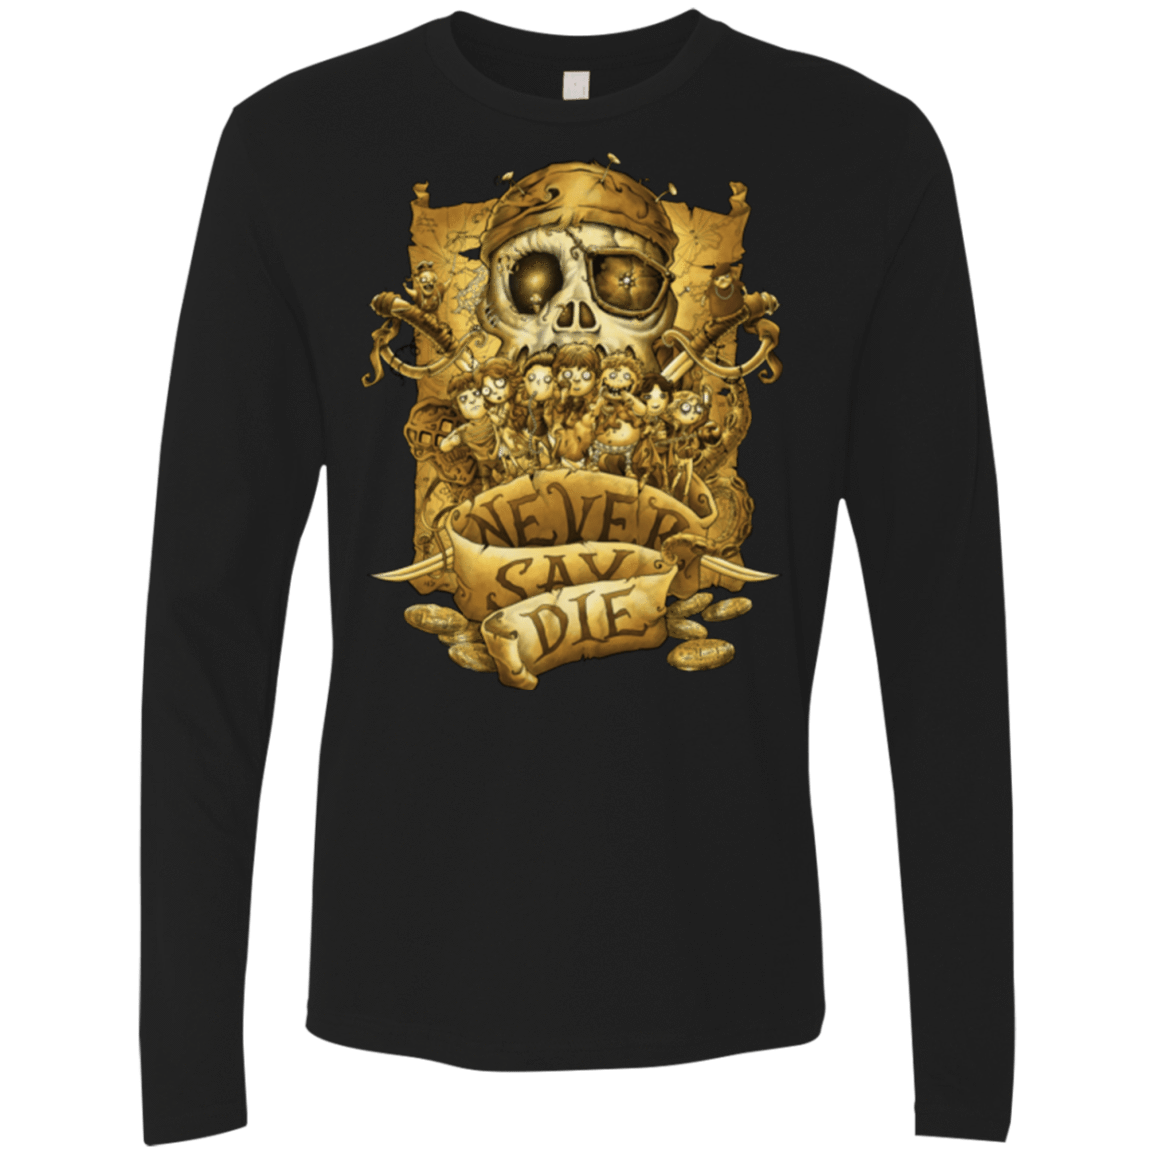 T-Shirts Black / Small Never Say Die Men's Premium Long Sleeve